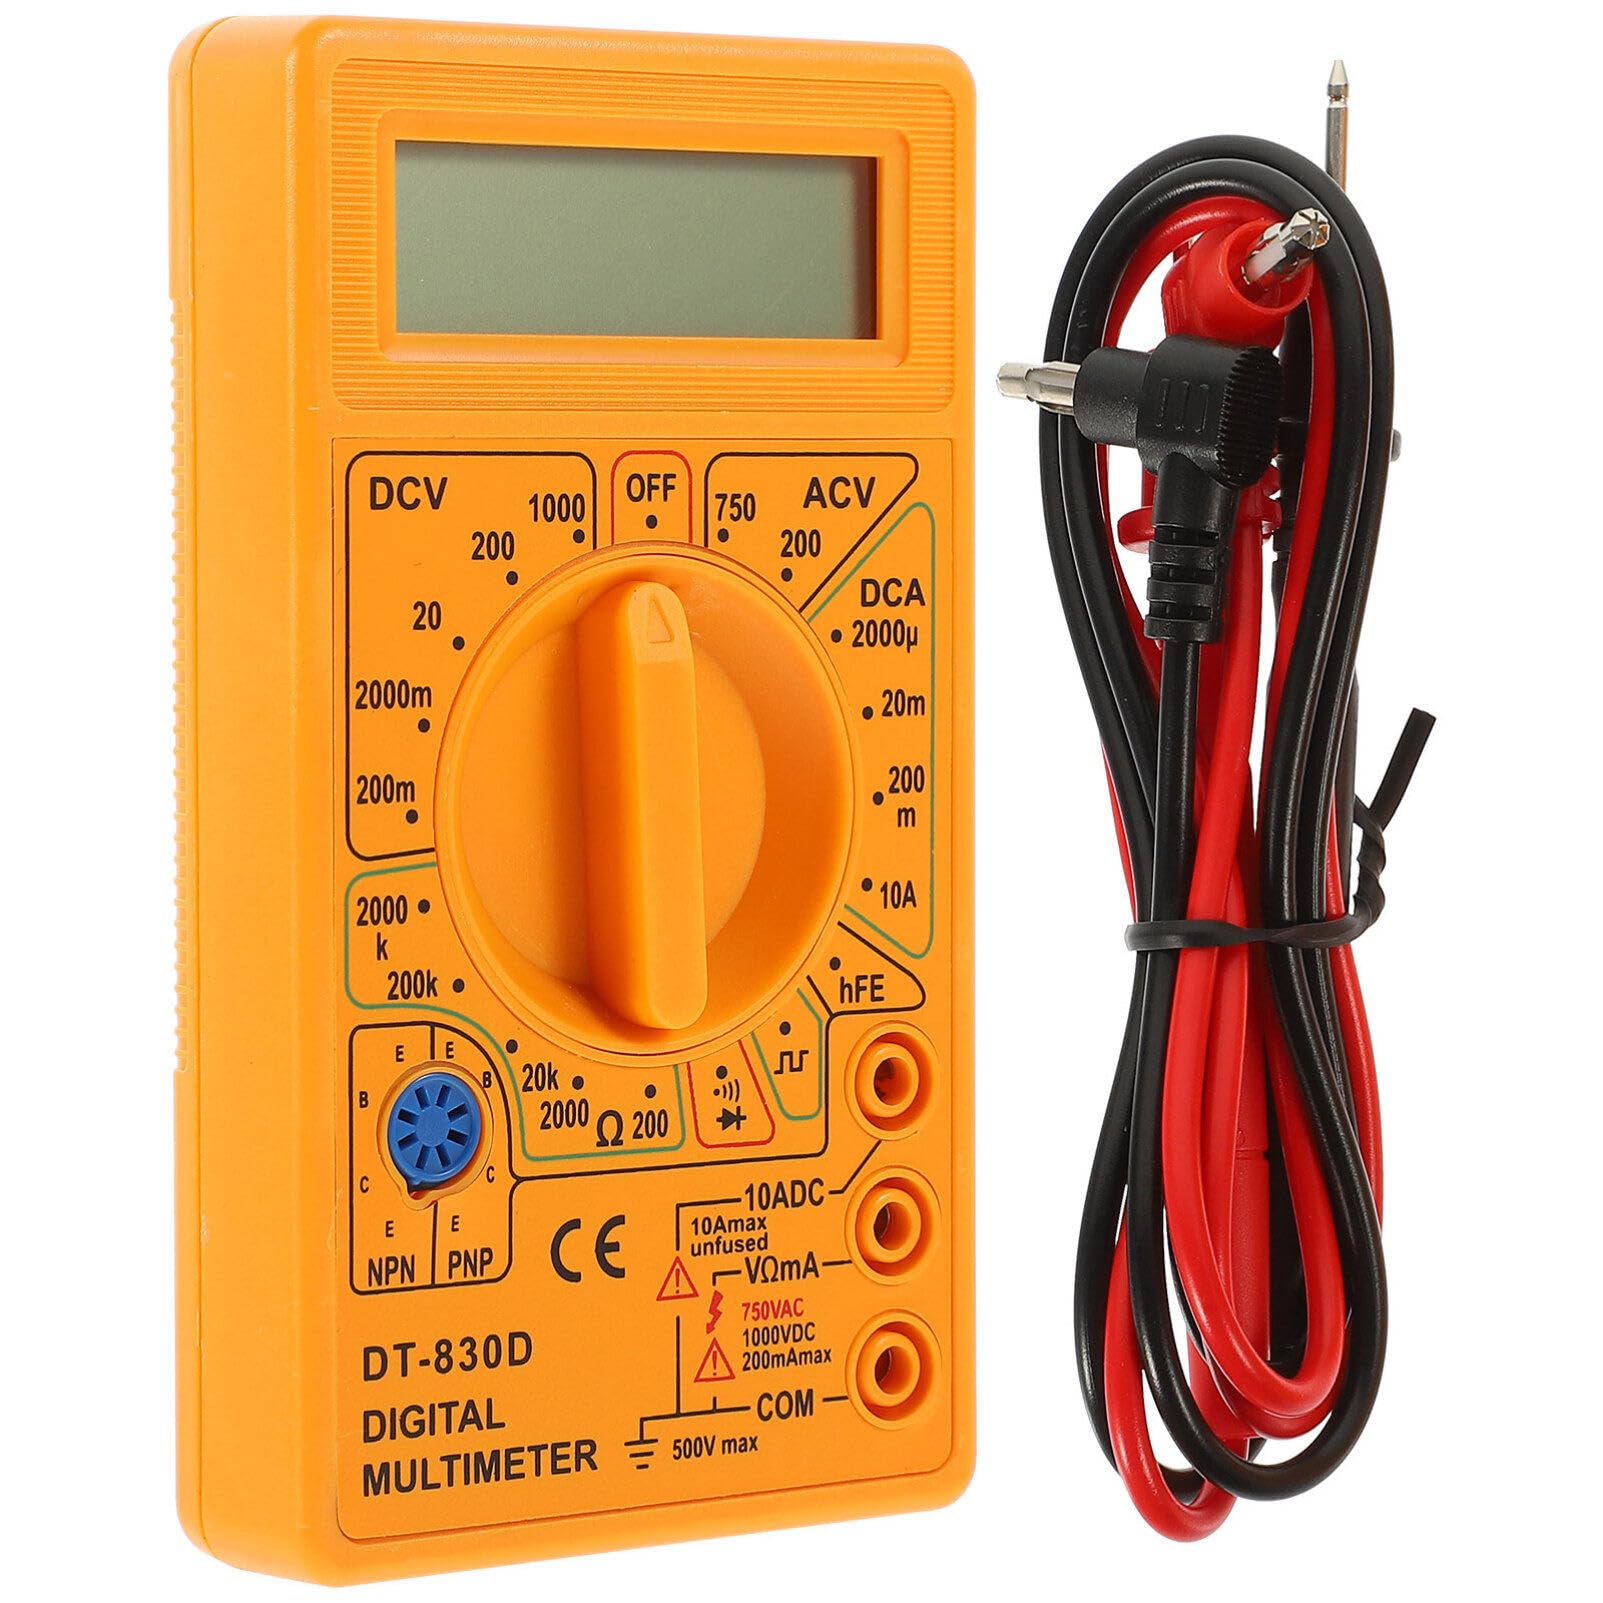 Test the voltage output of the wires or battery using a multimeter.
If using a battery, try replacing it with a fully charged one.